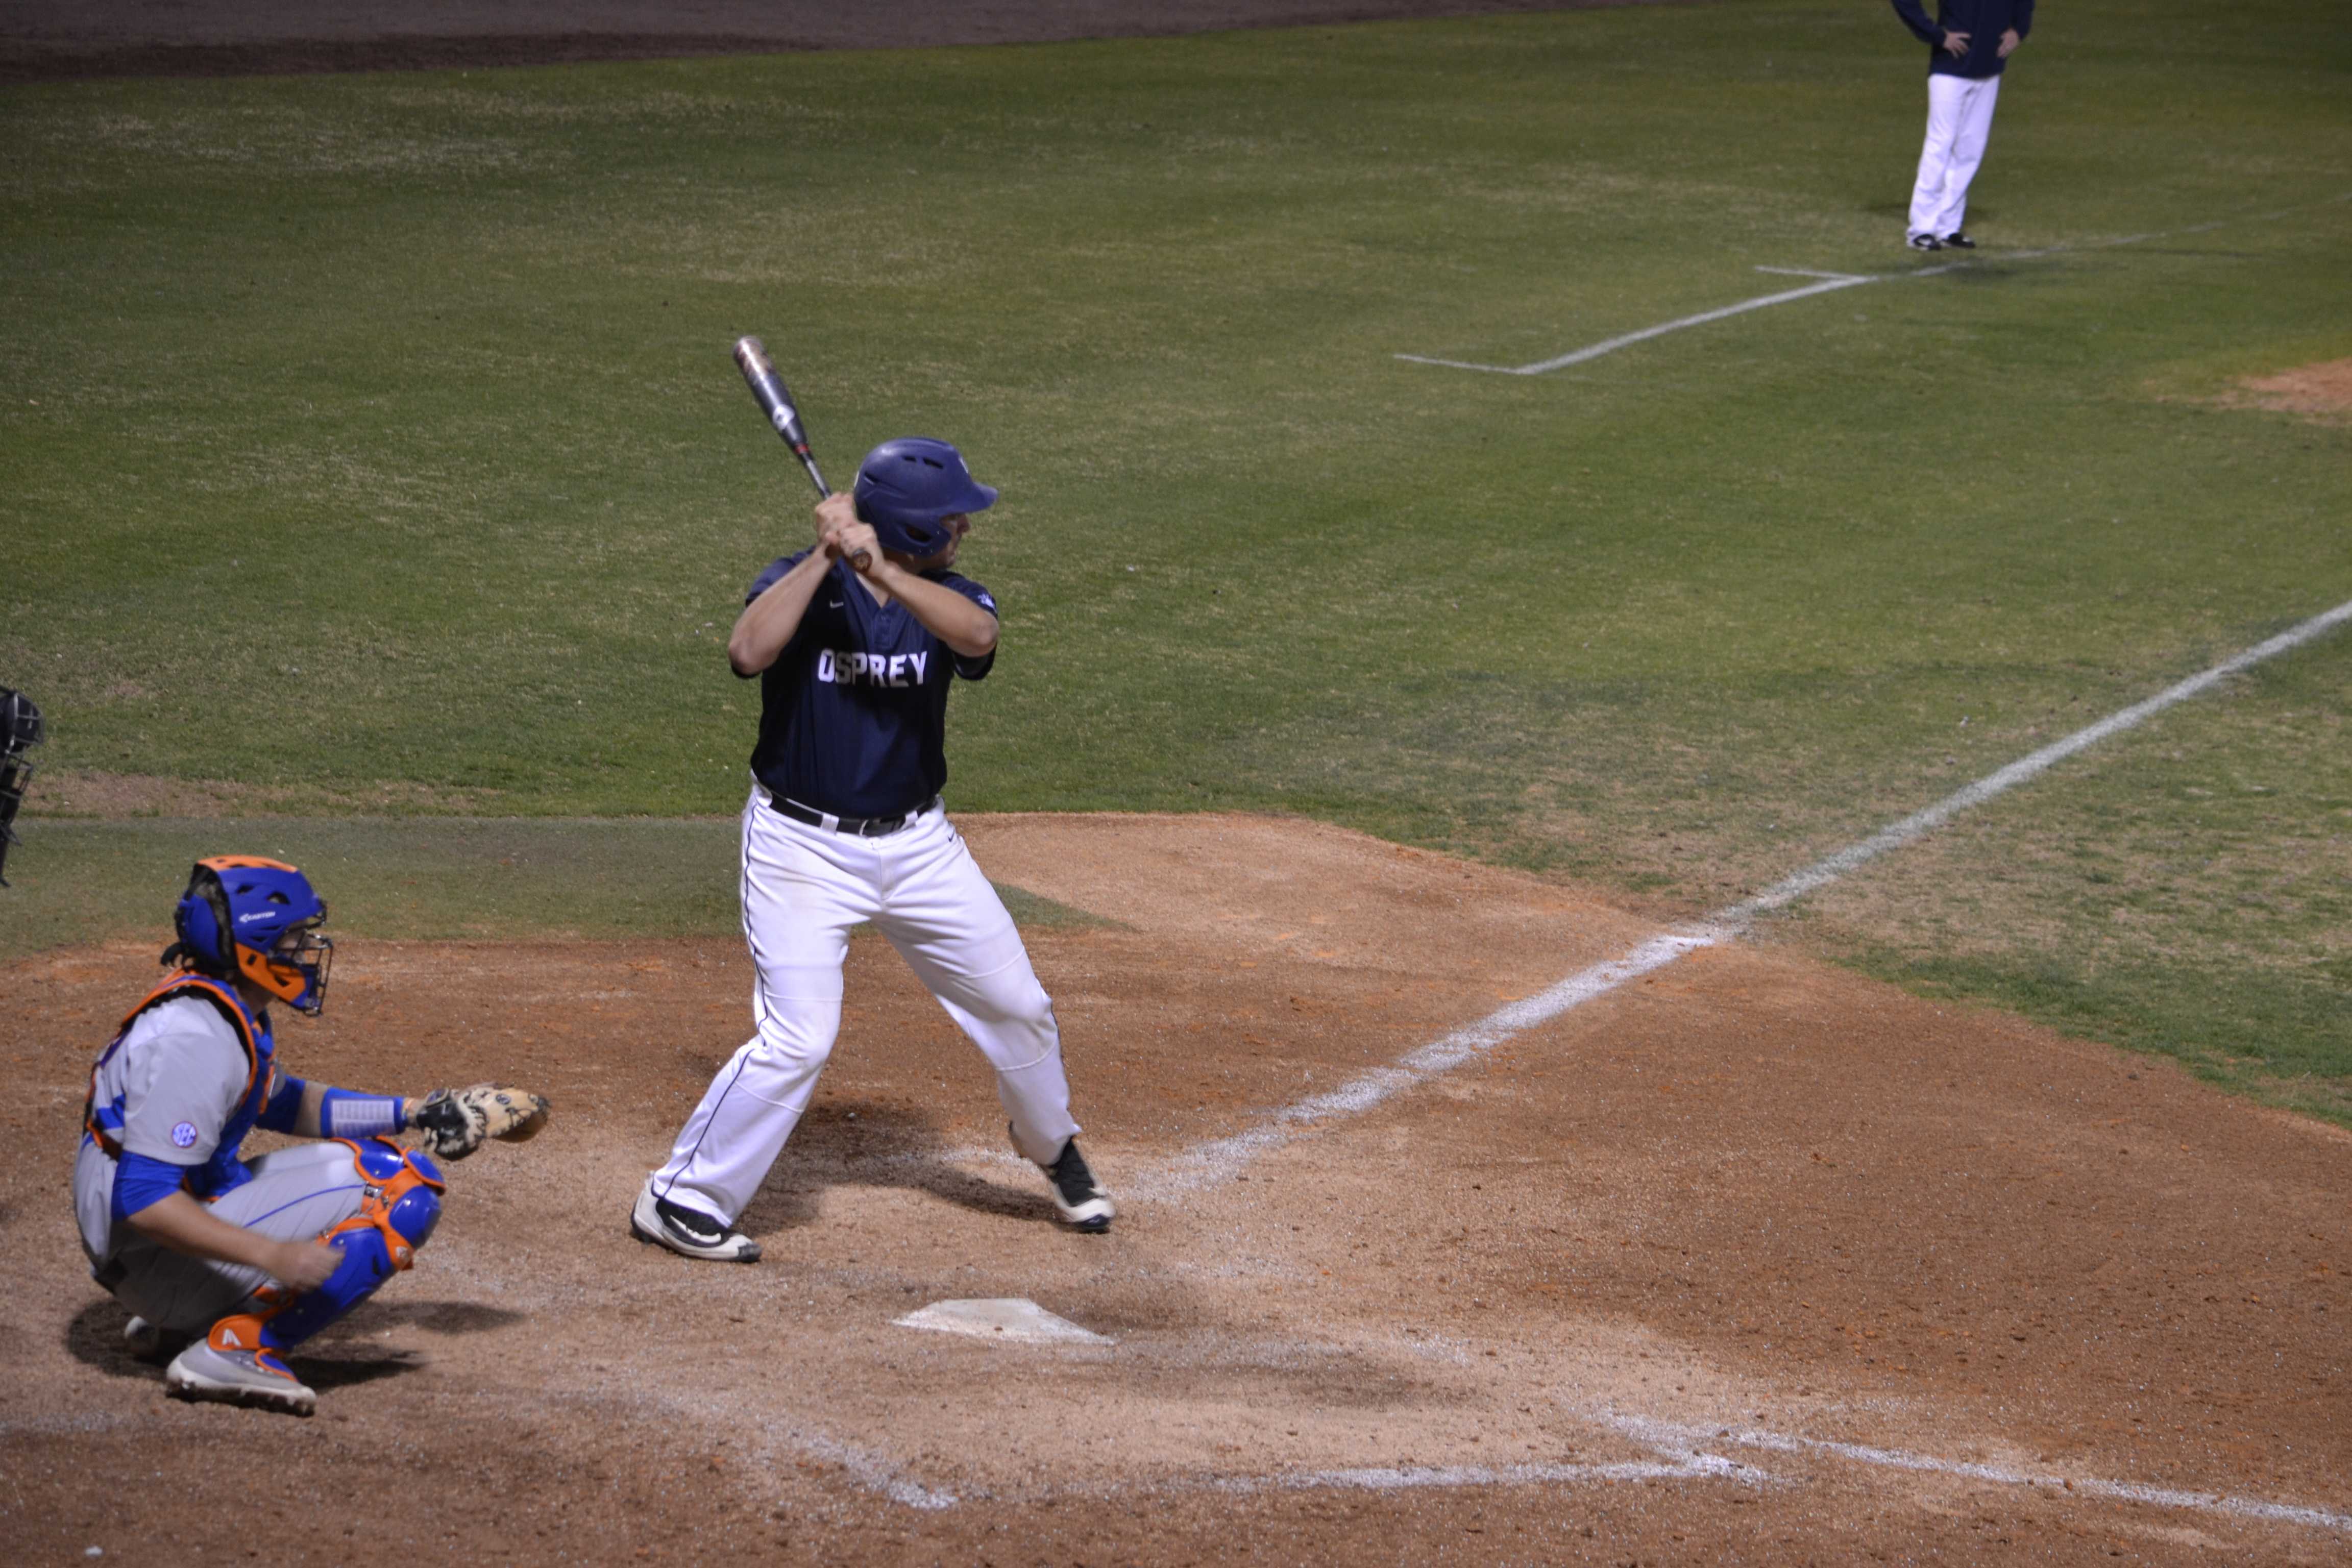 Corbin Olmstead looks on during an at-bat against the University of Florida. Photo by Emily Woodbury